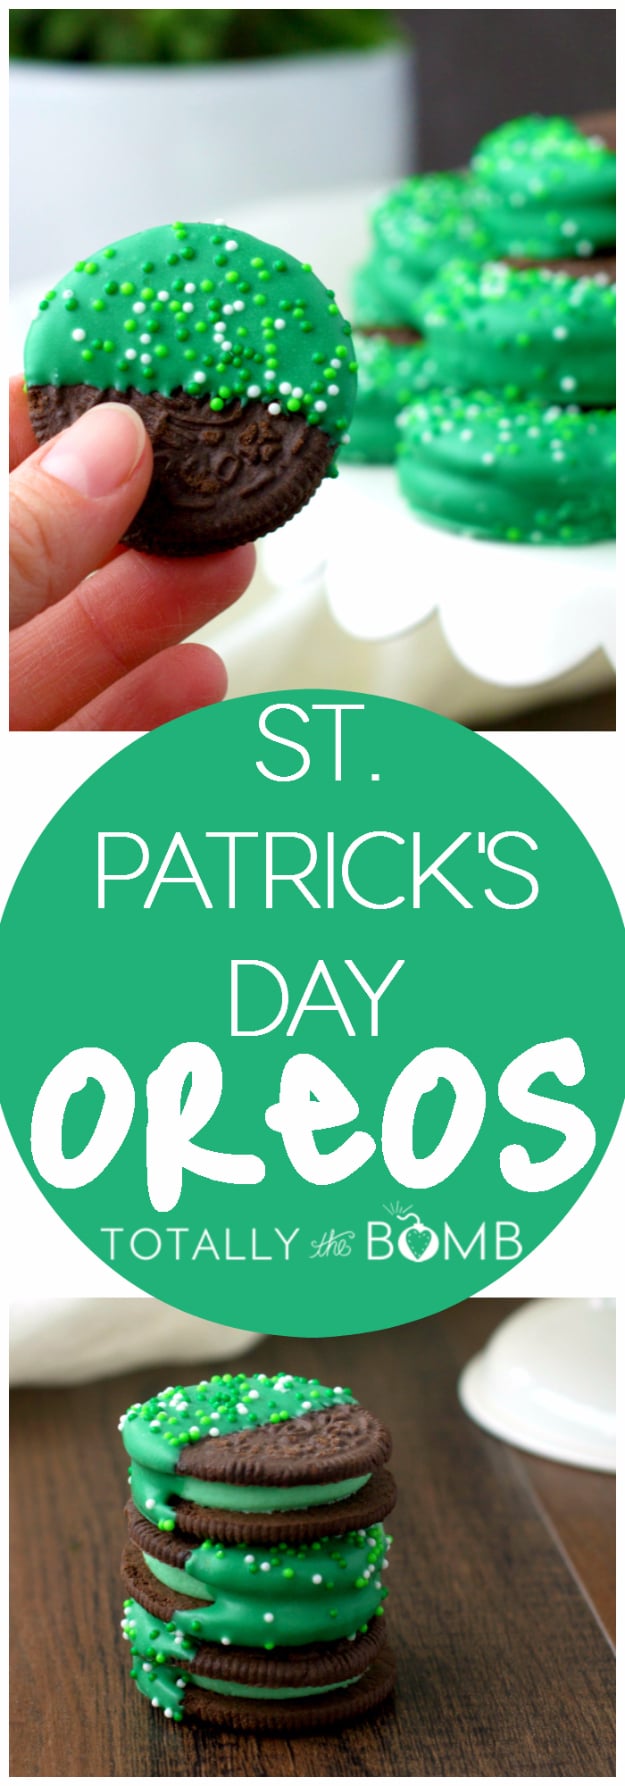 DIY St Patricks Day Ideas - St. Patrick's Day Oreos - Food and Best Recipes, Decorations and Home Decor, Party Ideas - Cupcakes, Drinks, Festive St Patrick Day Parties With these Easy, Quick and Cool Crafts and DIY Projects http://diyjoy.com/st-patricks-day-ideas